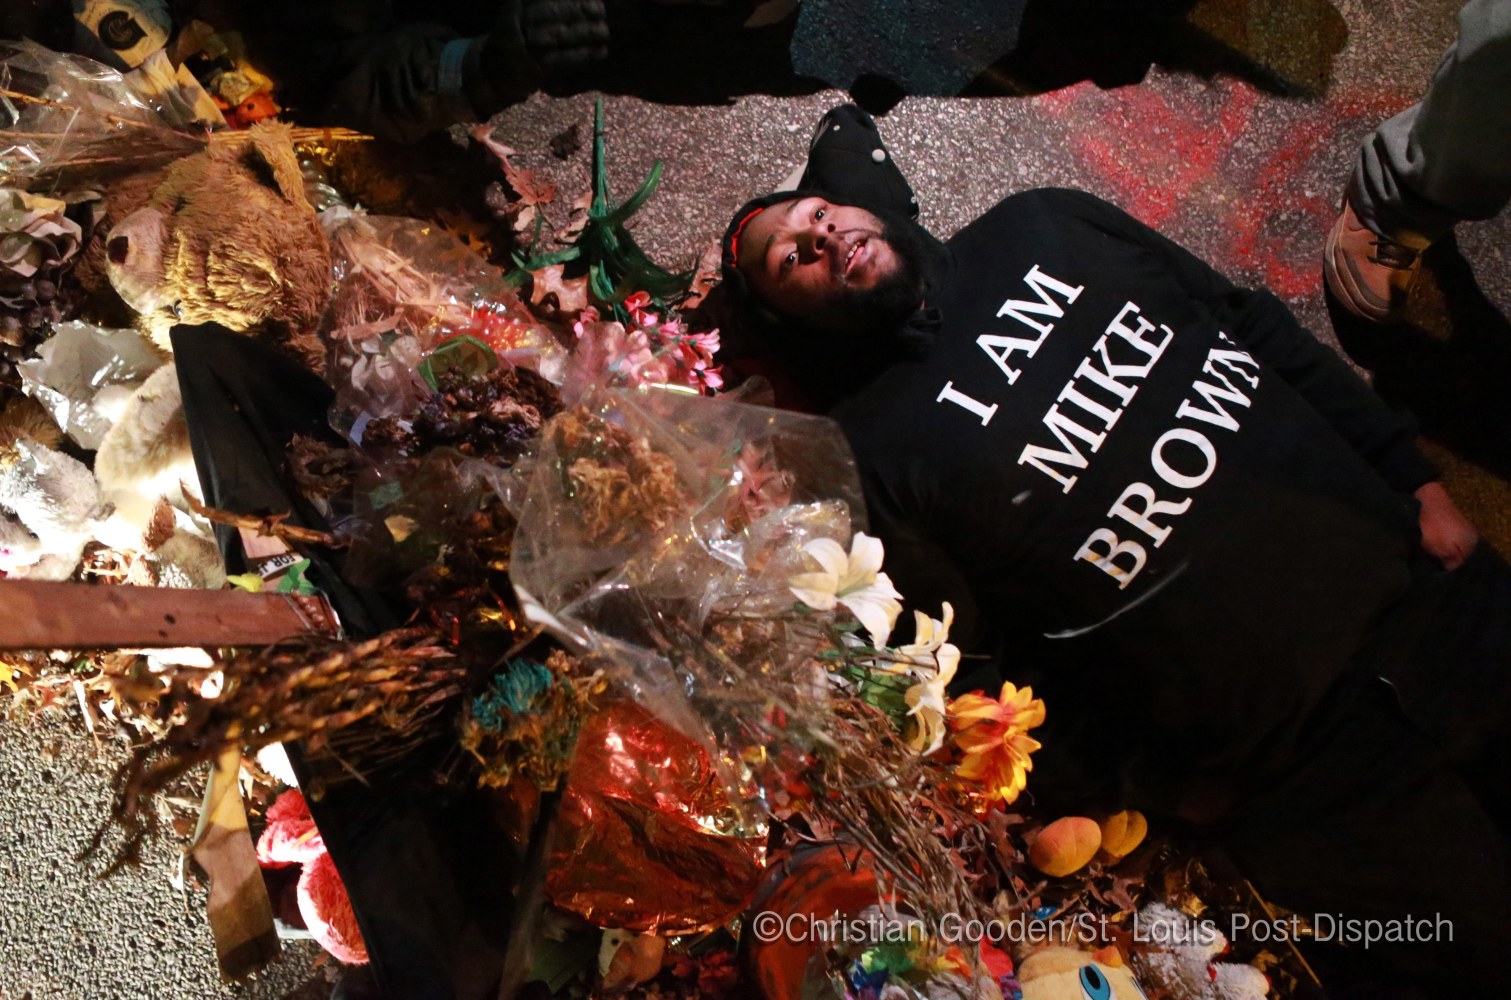 Ferguson Frontlines: Photojournalist Reflects One Year Later - NBC News1512 x 1000